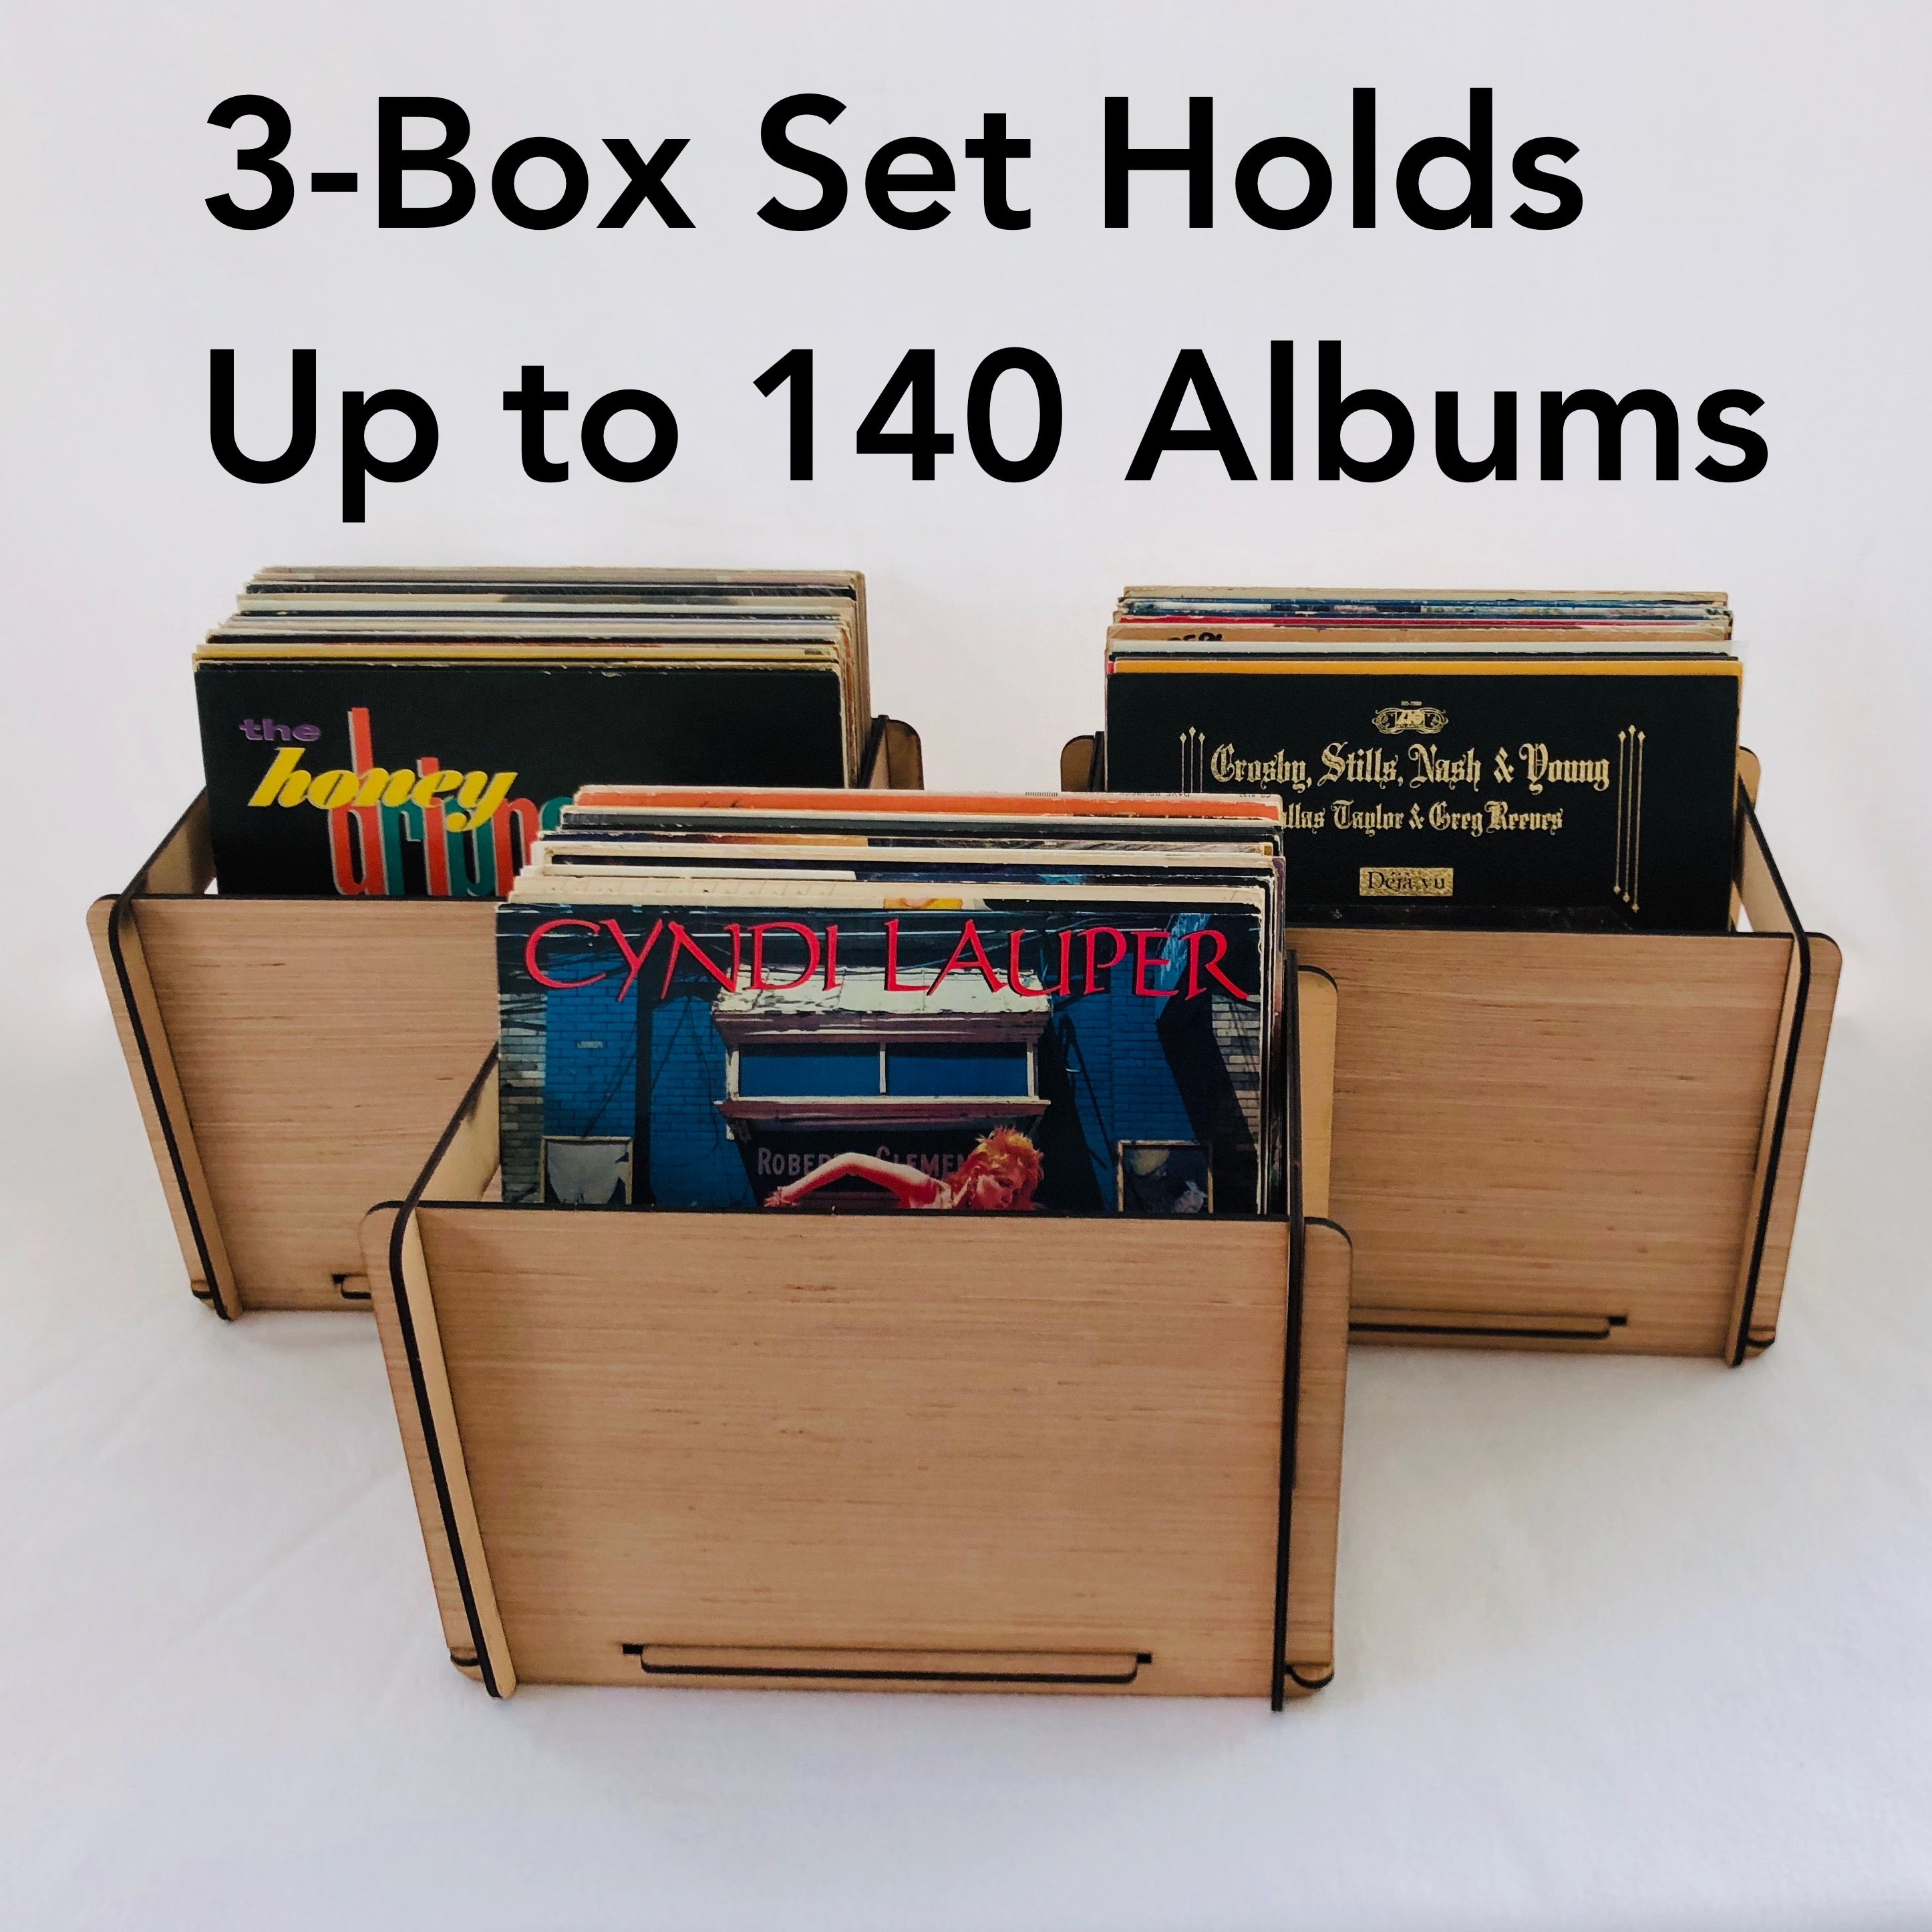 Vinyl Record Storage Crates These Wood LP Record Boxes come in